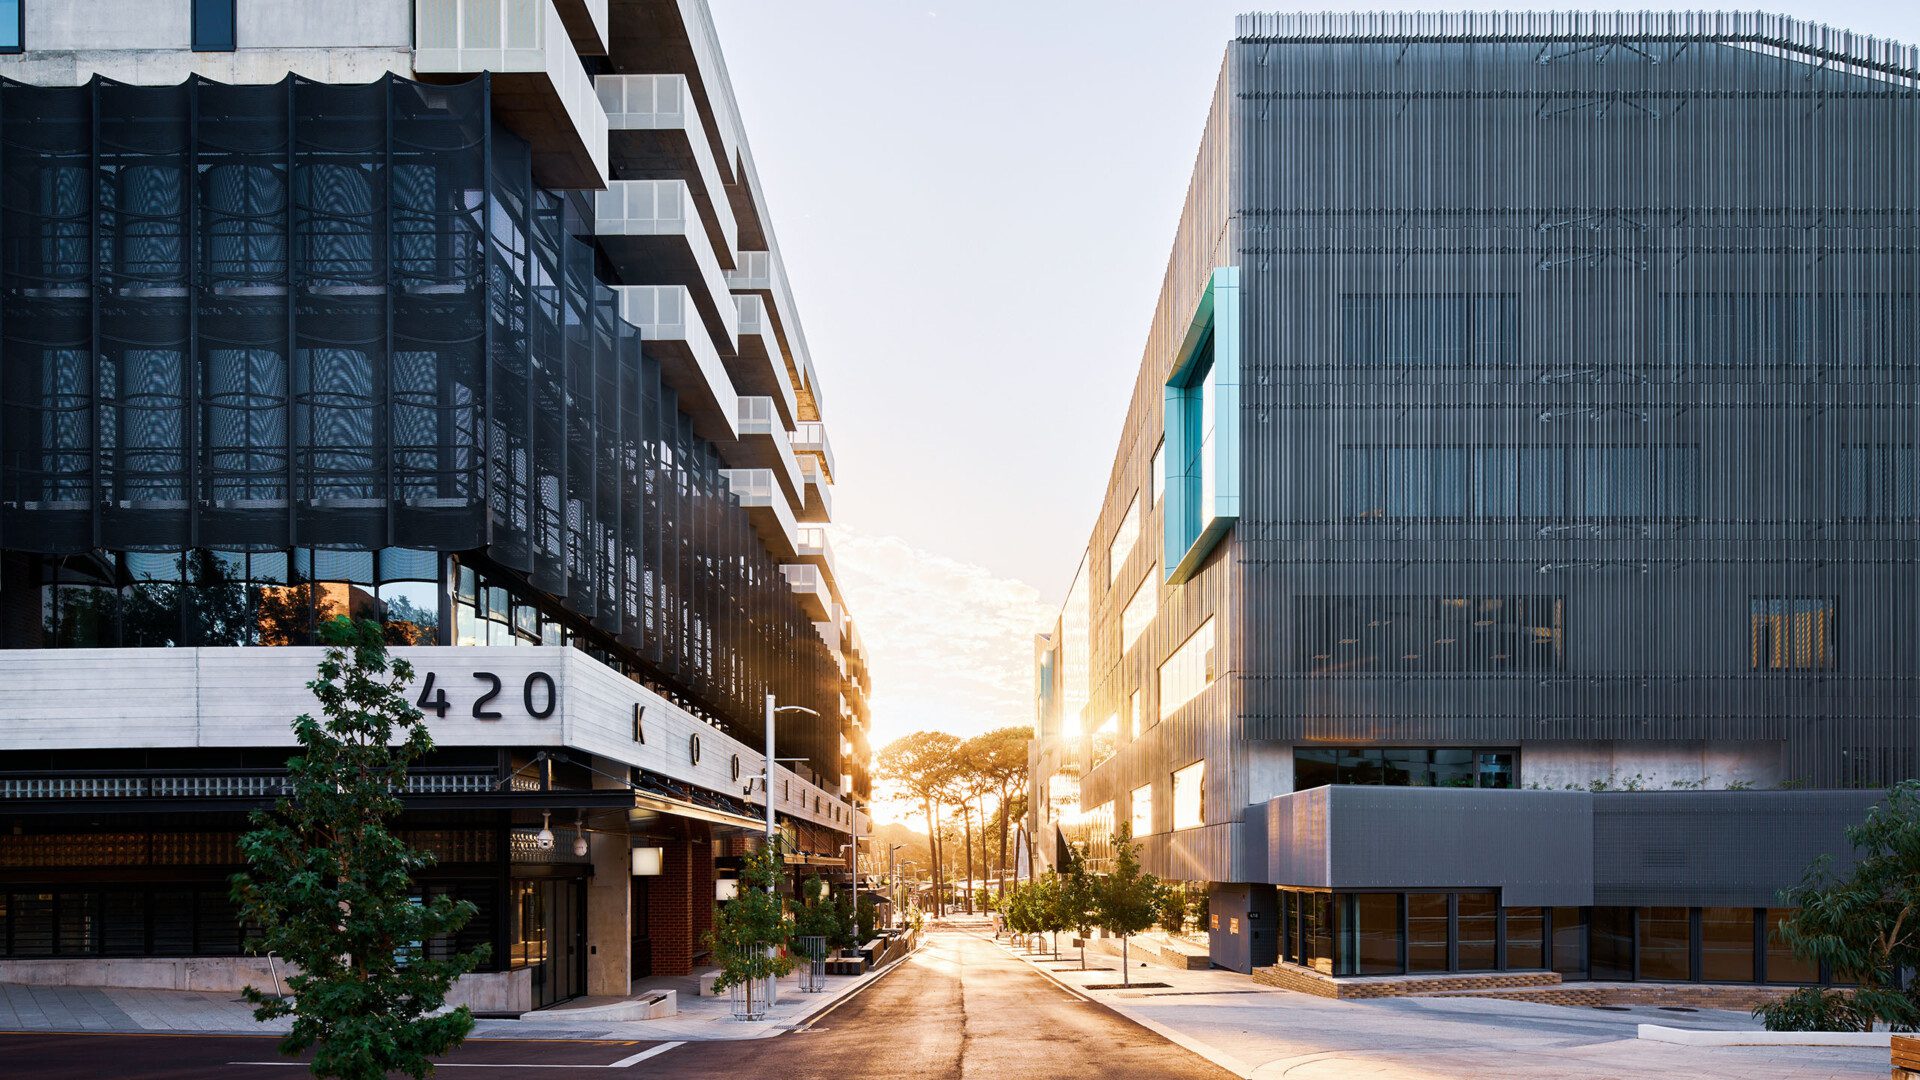 Buildings 420 - Nesuto Curtin Hotel, and 418 - School of Design & Built Environment